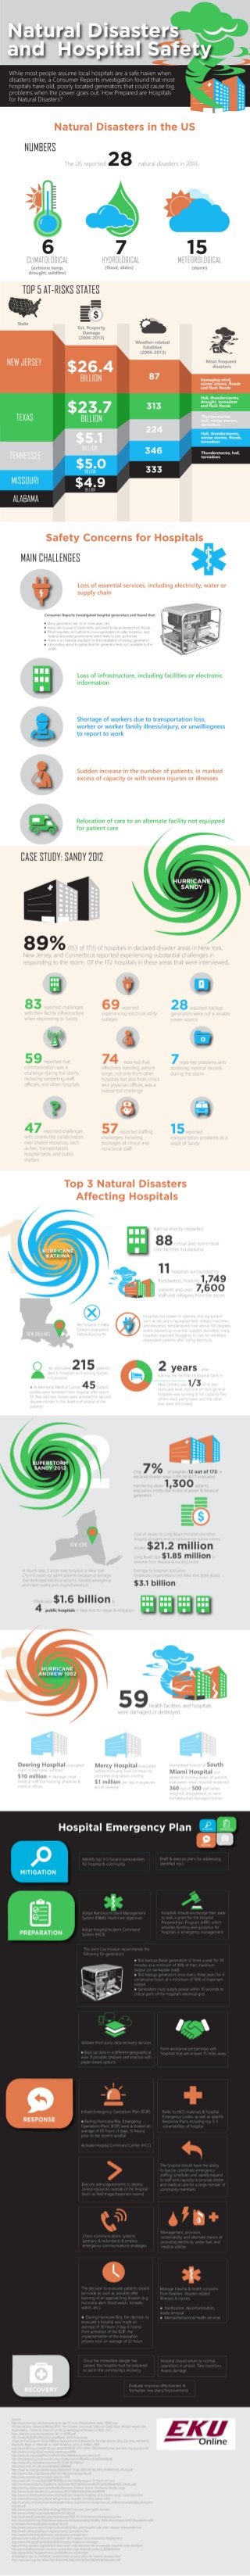 Natural Disasters and Hospital Safety Prepareness